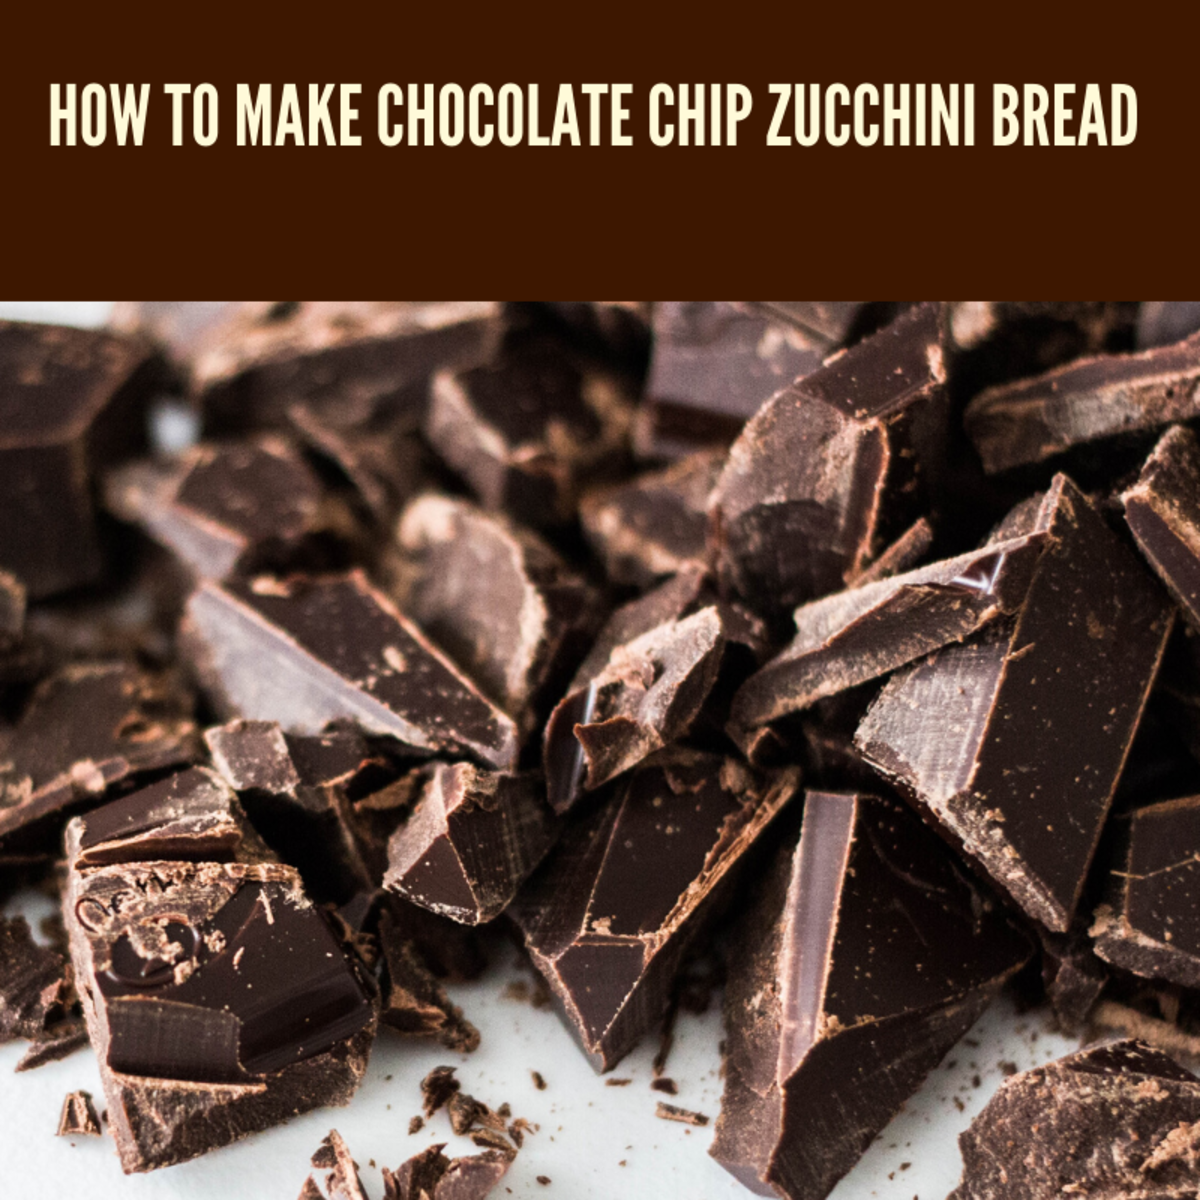 This chocolate zucchini recipe is great for the whole family. 